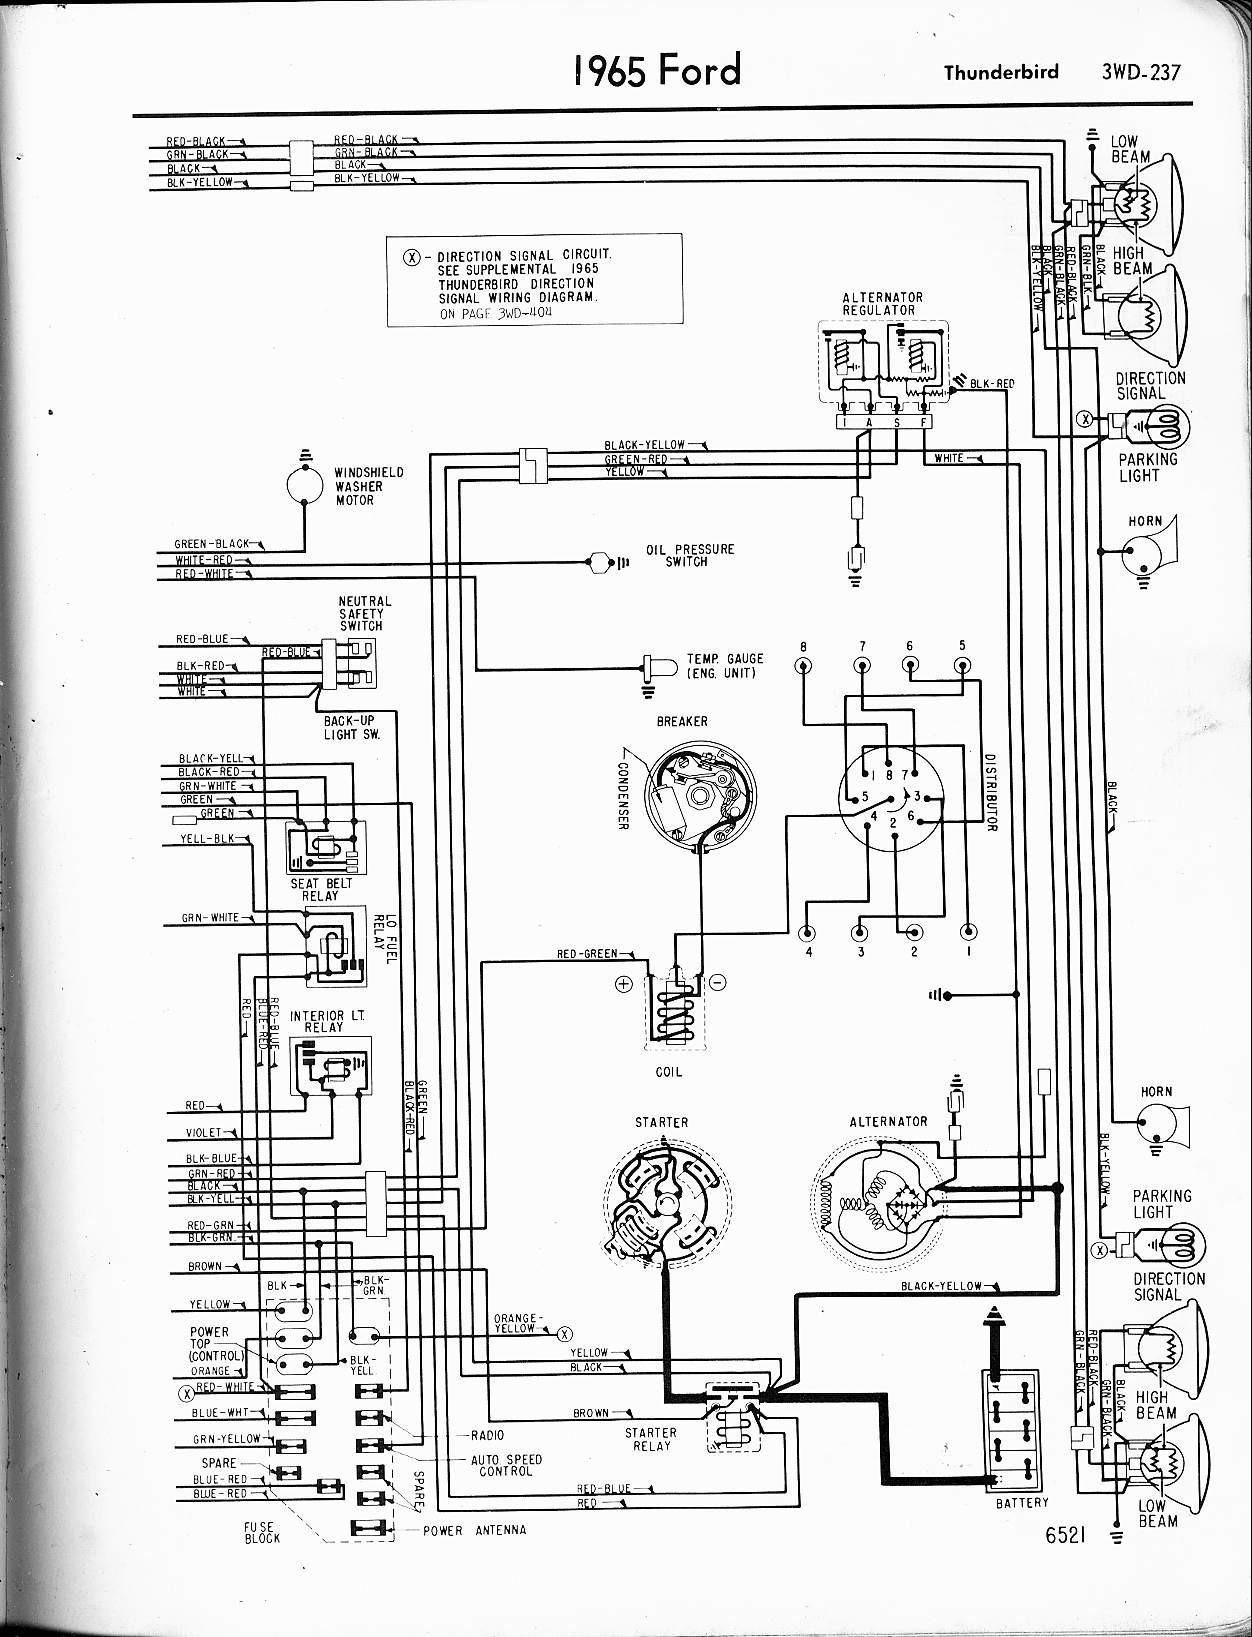 Ford F250 Wiring Diagram Electrical Circuit Ford F150 Wiring Diagrams Best Volvo S40 2 0d Engine Diagram Free